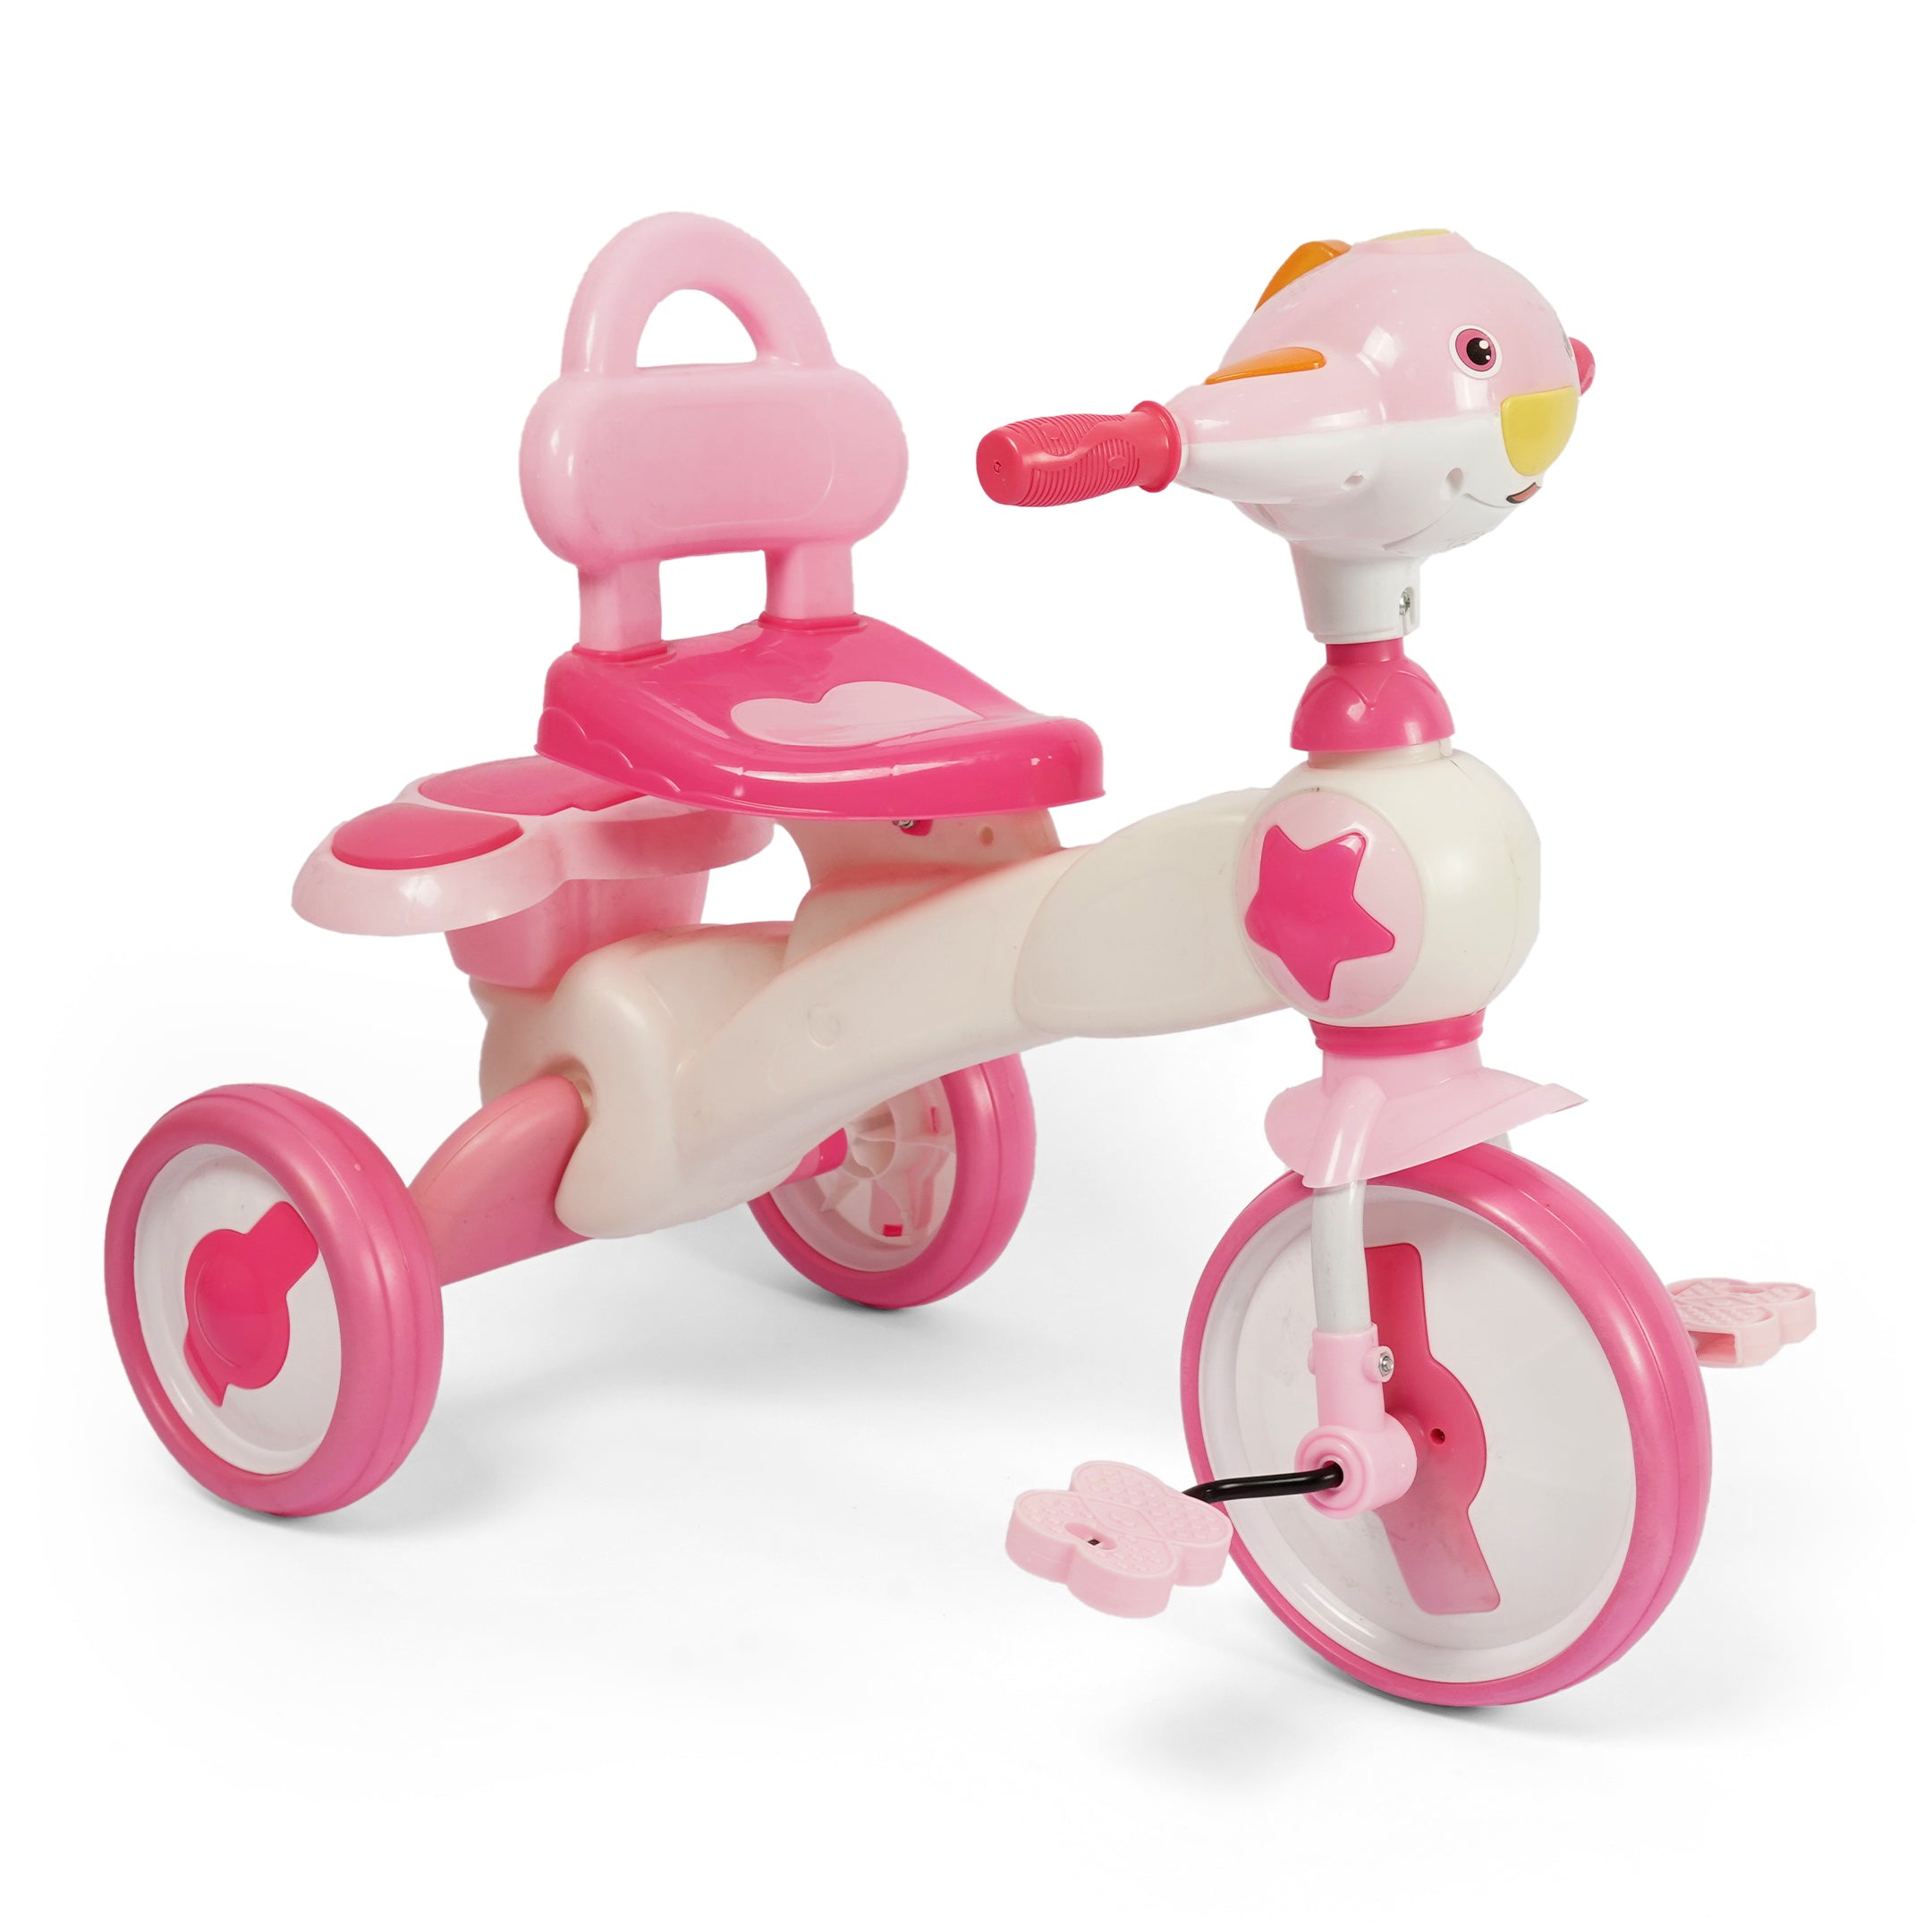 Bunny Face Kids Tricycle - Multicolor